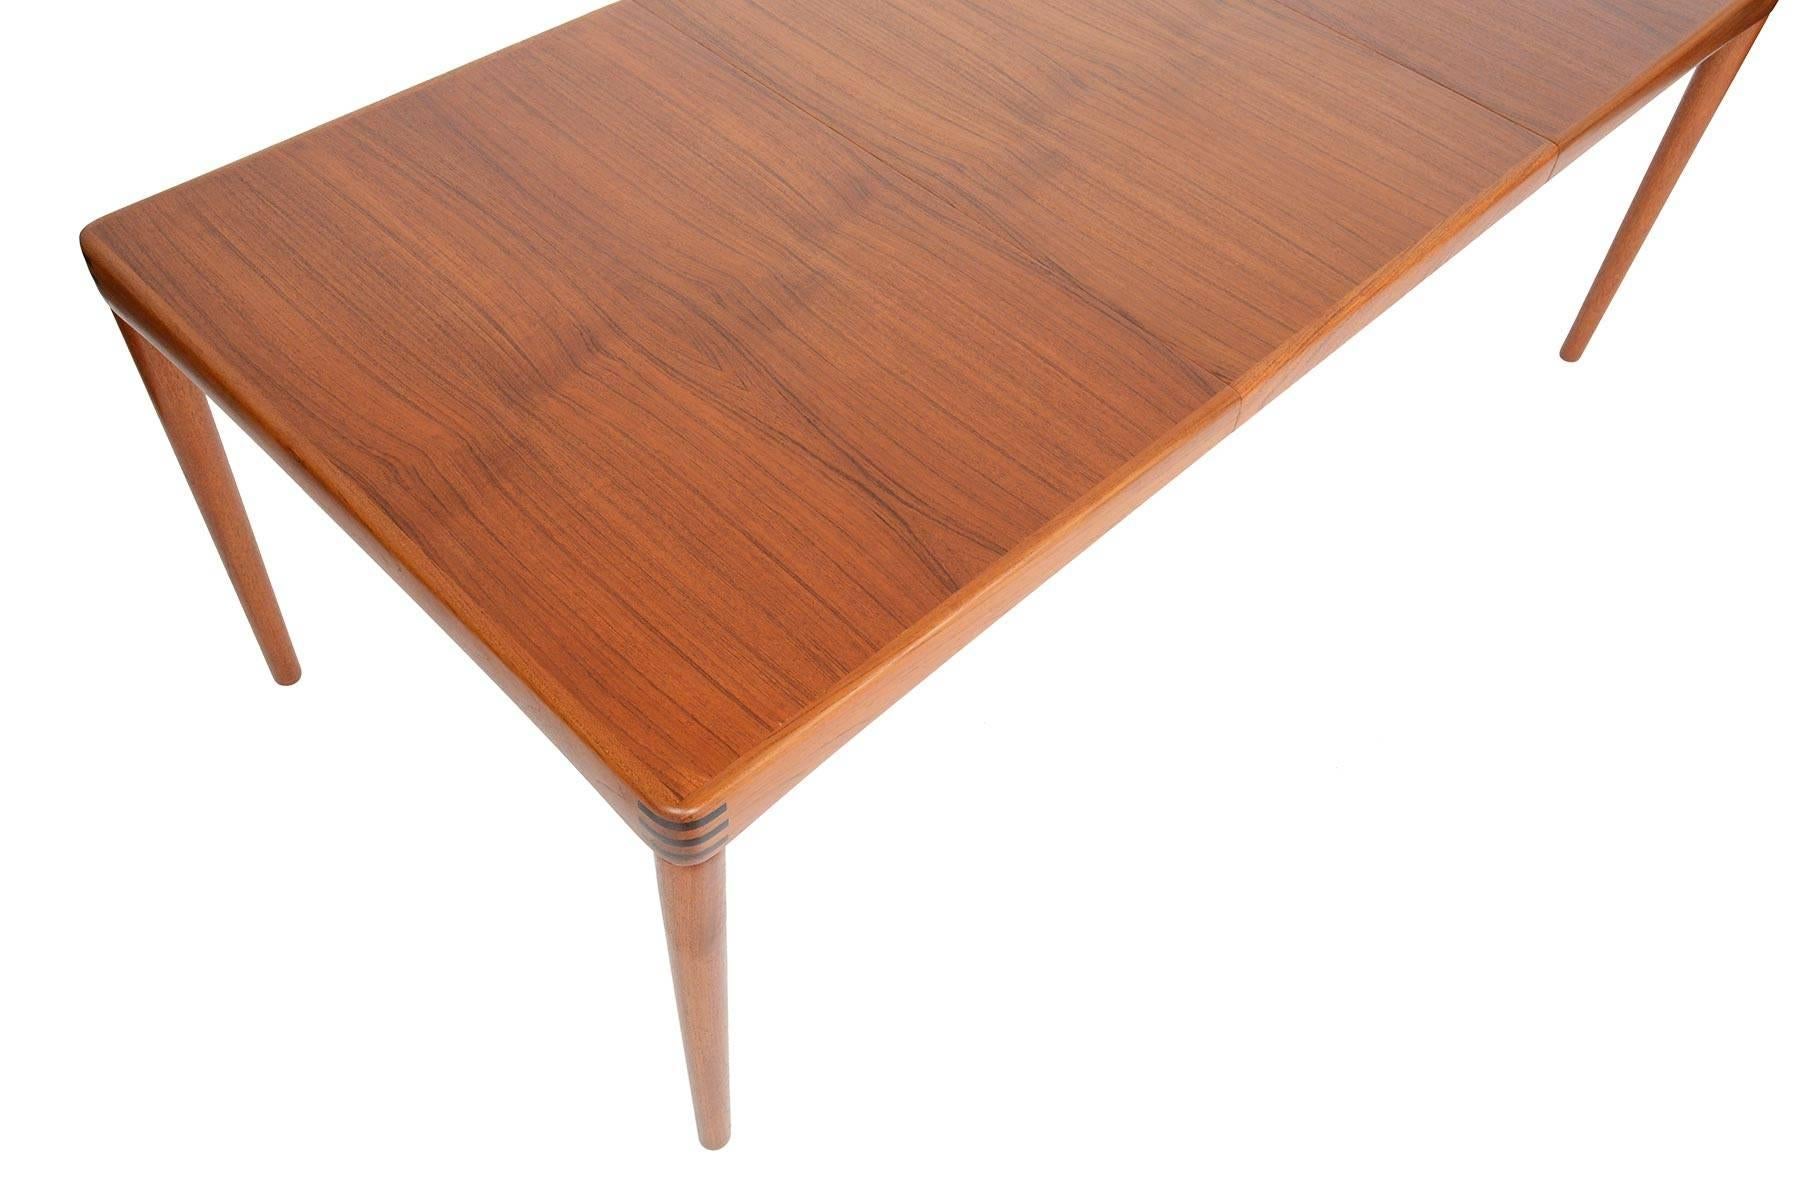 This stunning Danish modern midcentury dining table in teak was designed by H.W. Klein for Bramin in the 1960s. Beautiful banding is accented with Brazilian rosewood inlays around the corners. Table top expands to fit a single leaf and can